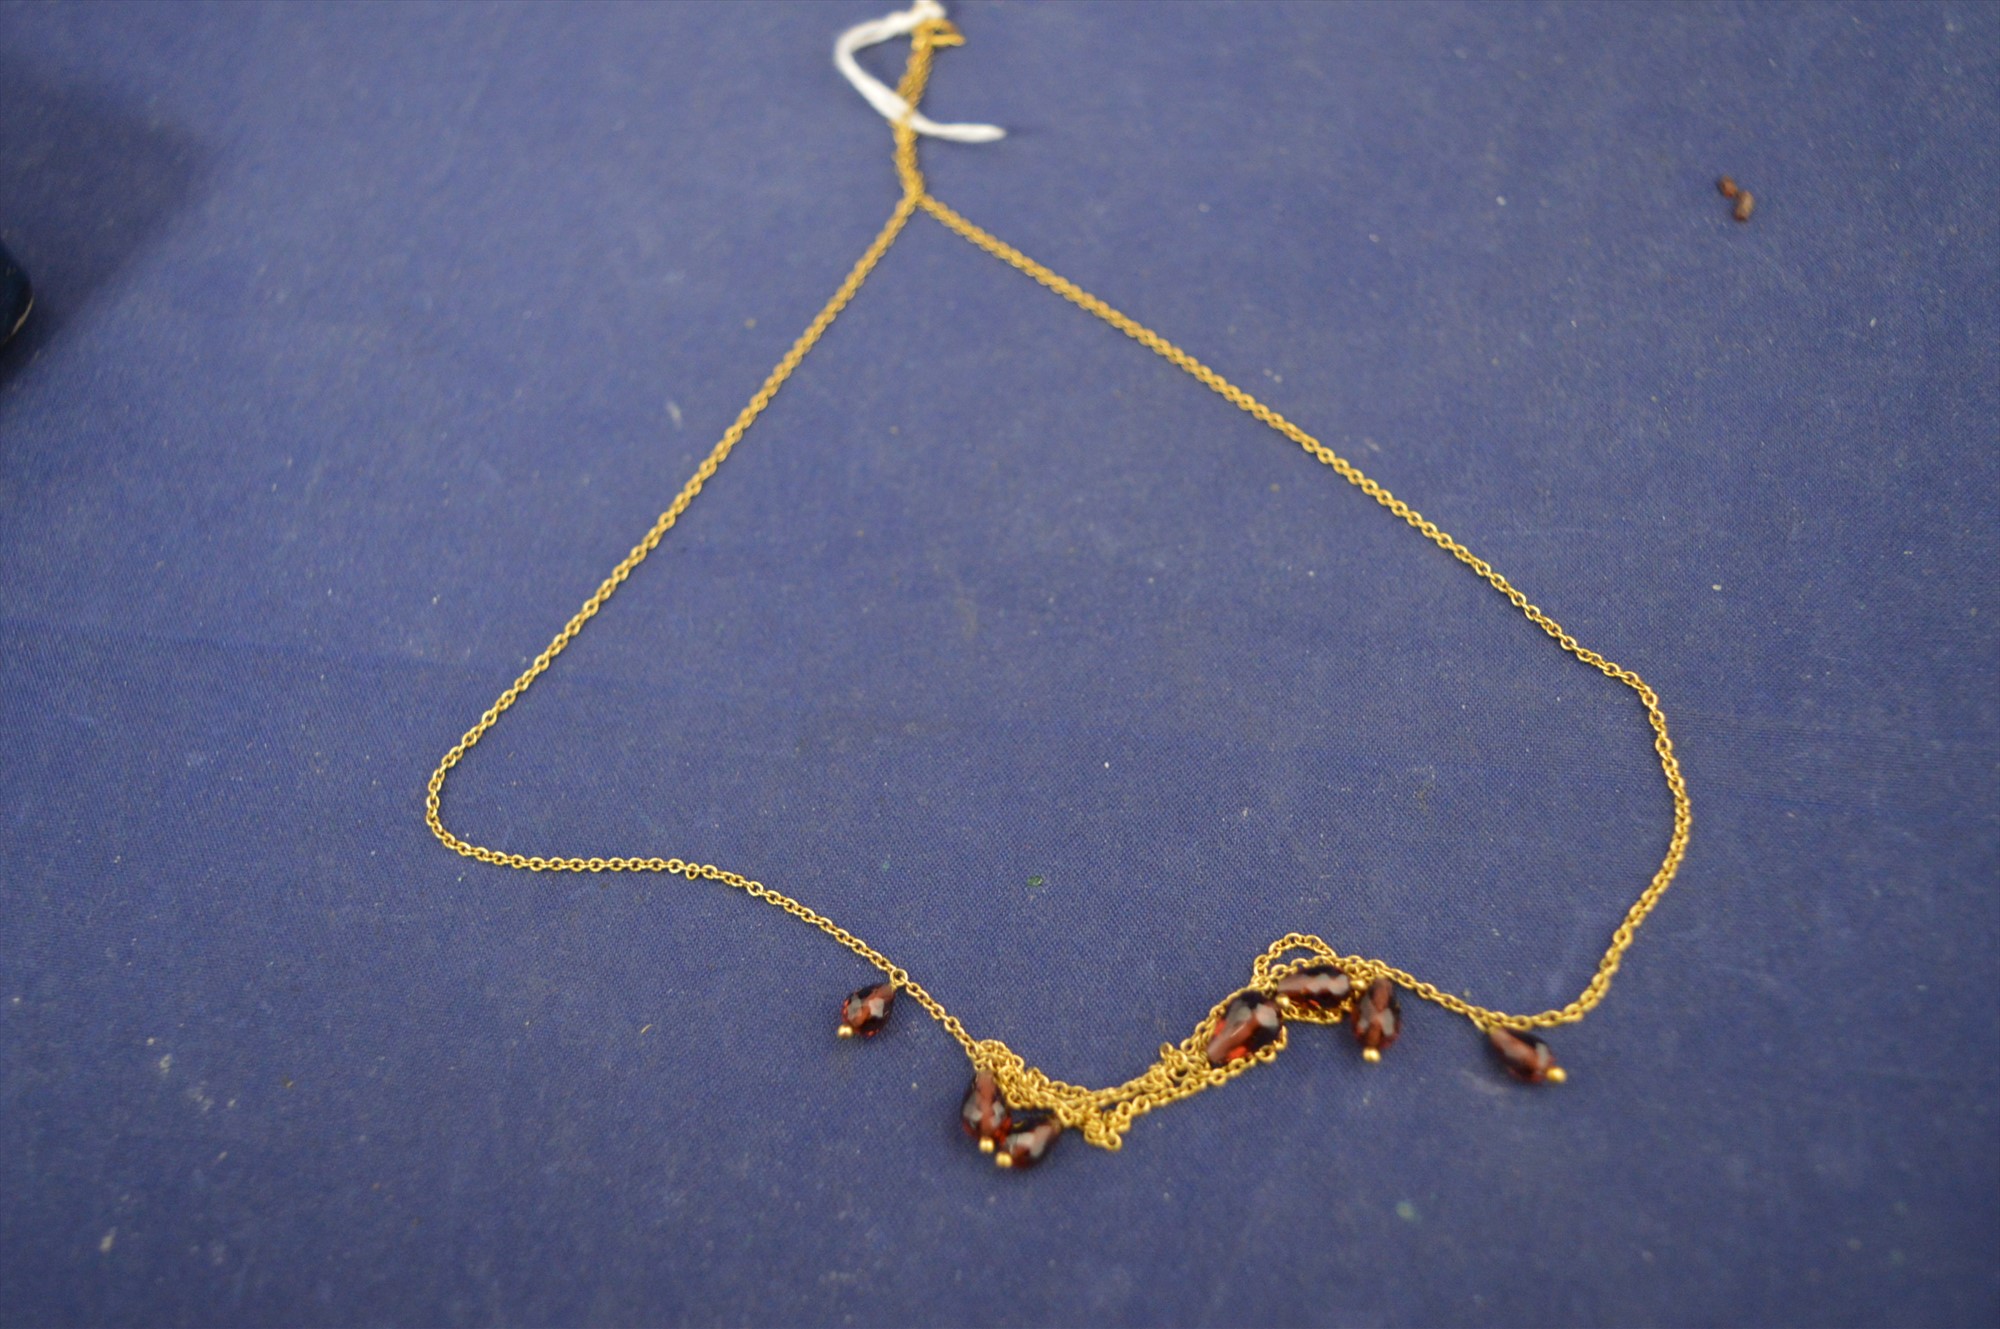 Gold and garnet necklace